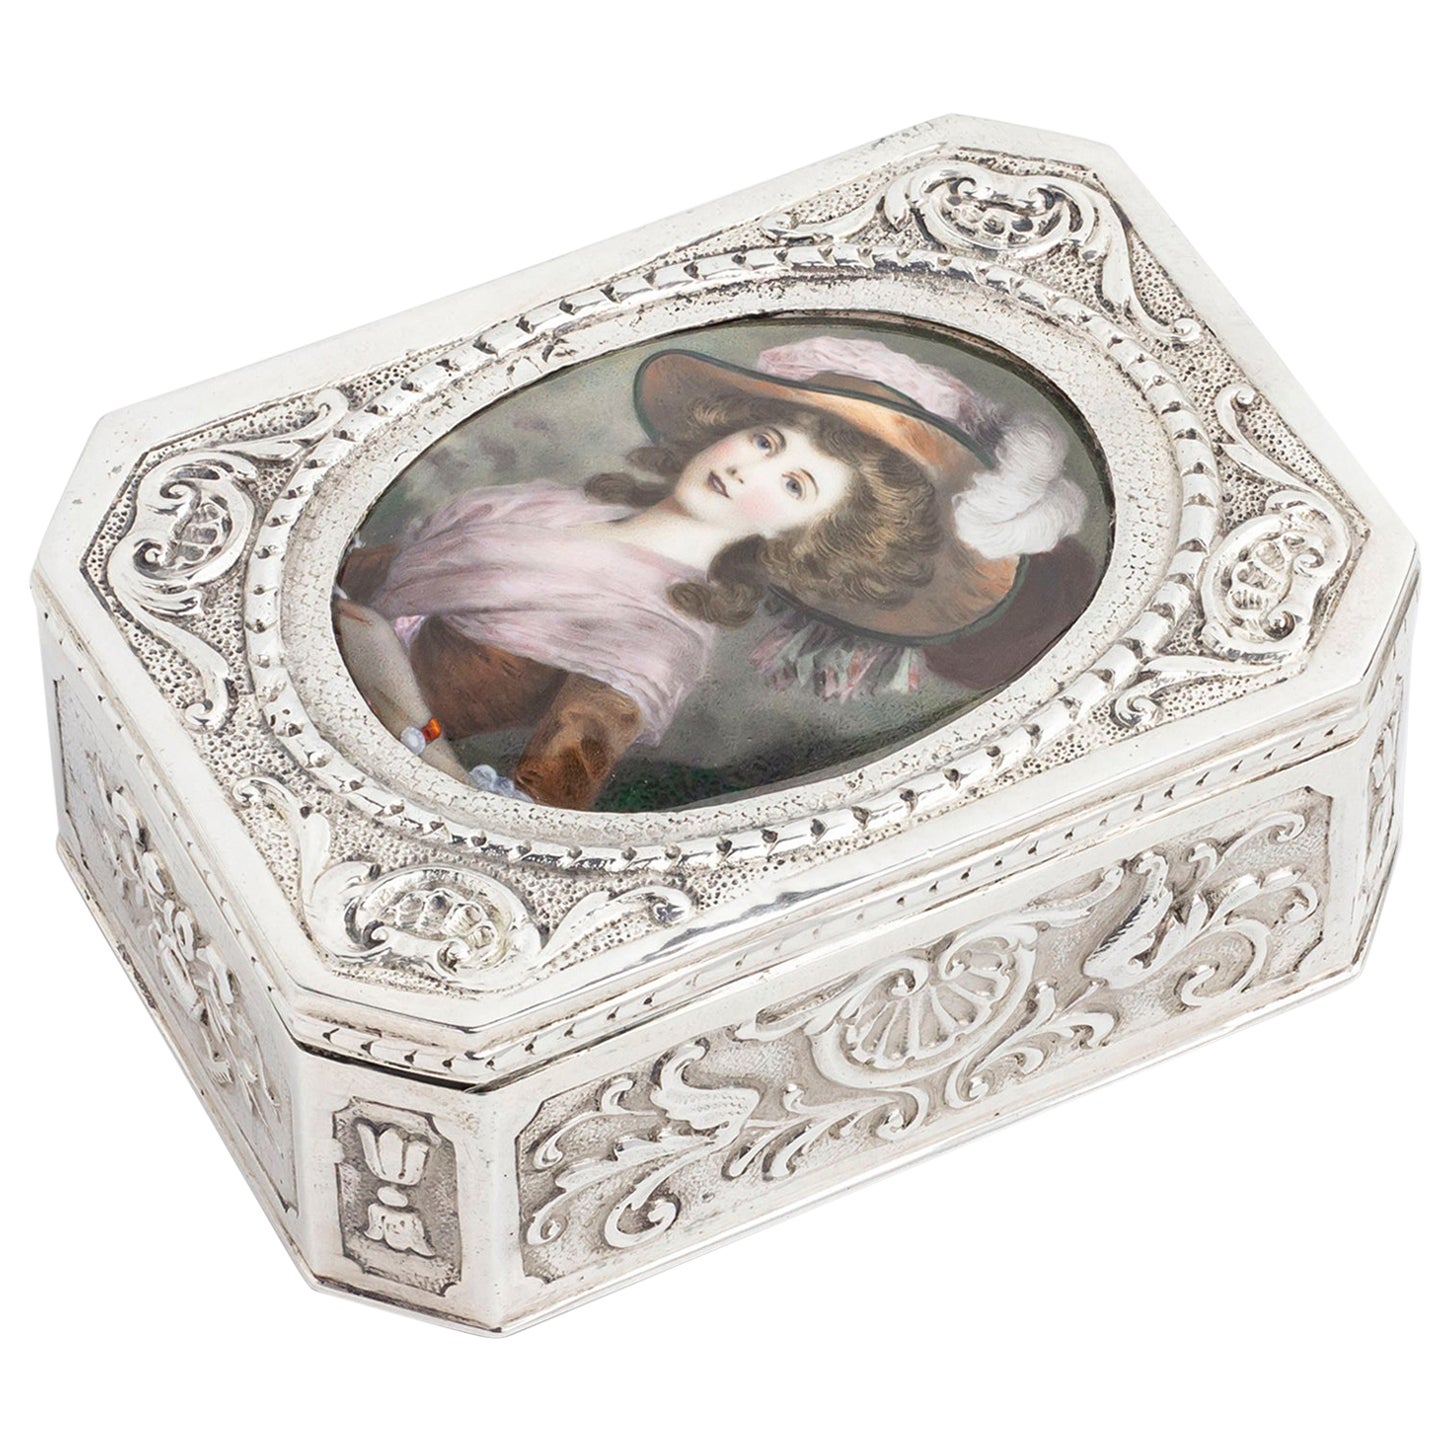 German 800 Purity Silver Repousse Box With Enamelled Medallion